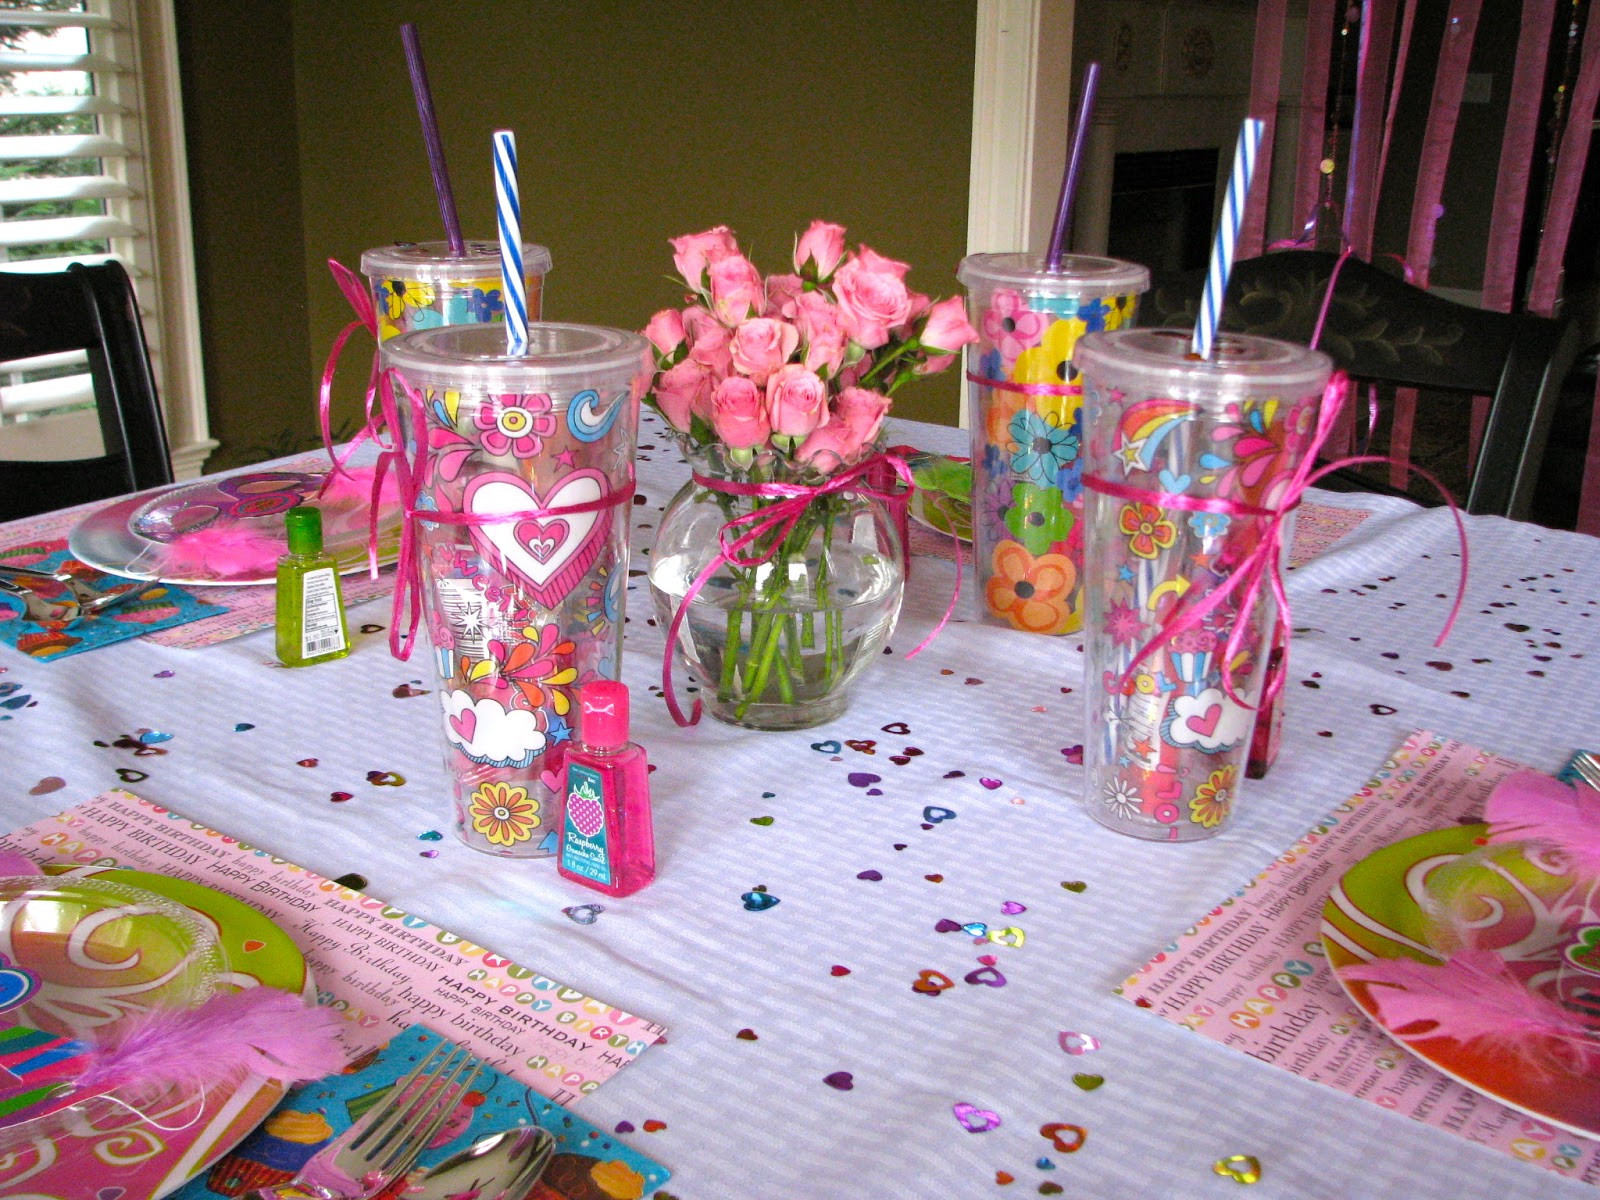 Girls Birthday Party Ideas
 HomeMadeville Your Place for HomeMade Inspiration Girl s